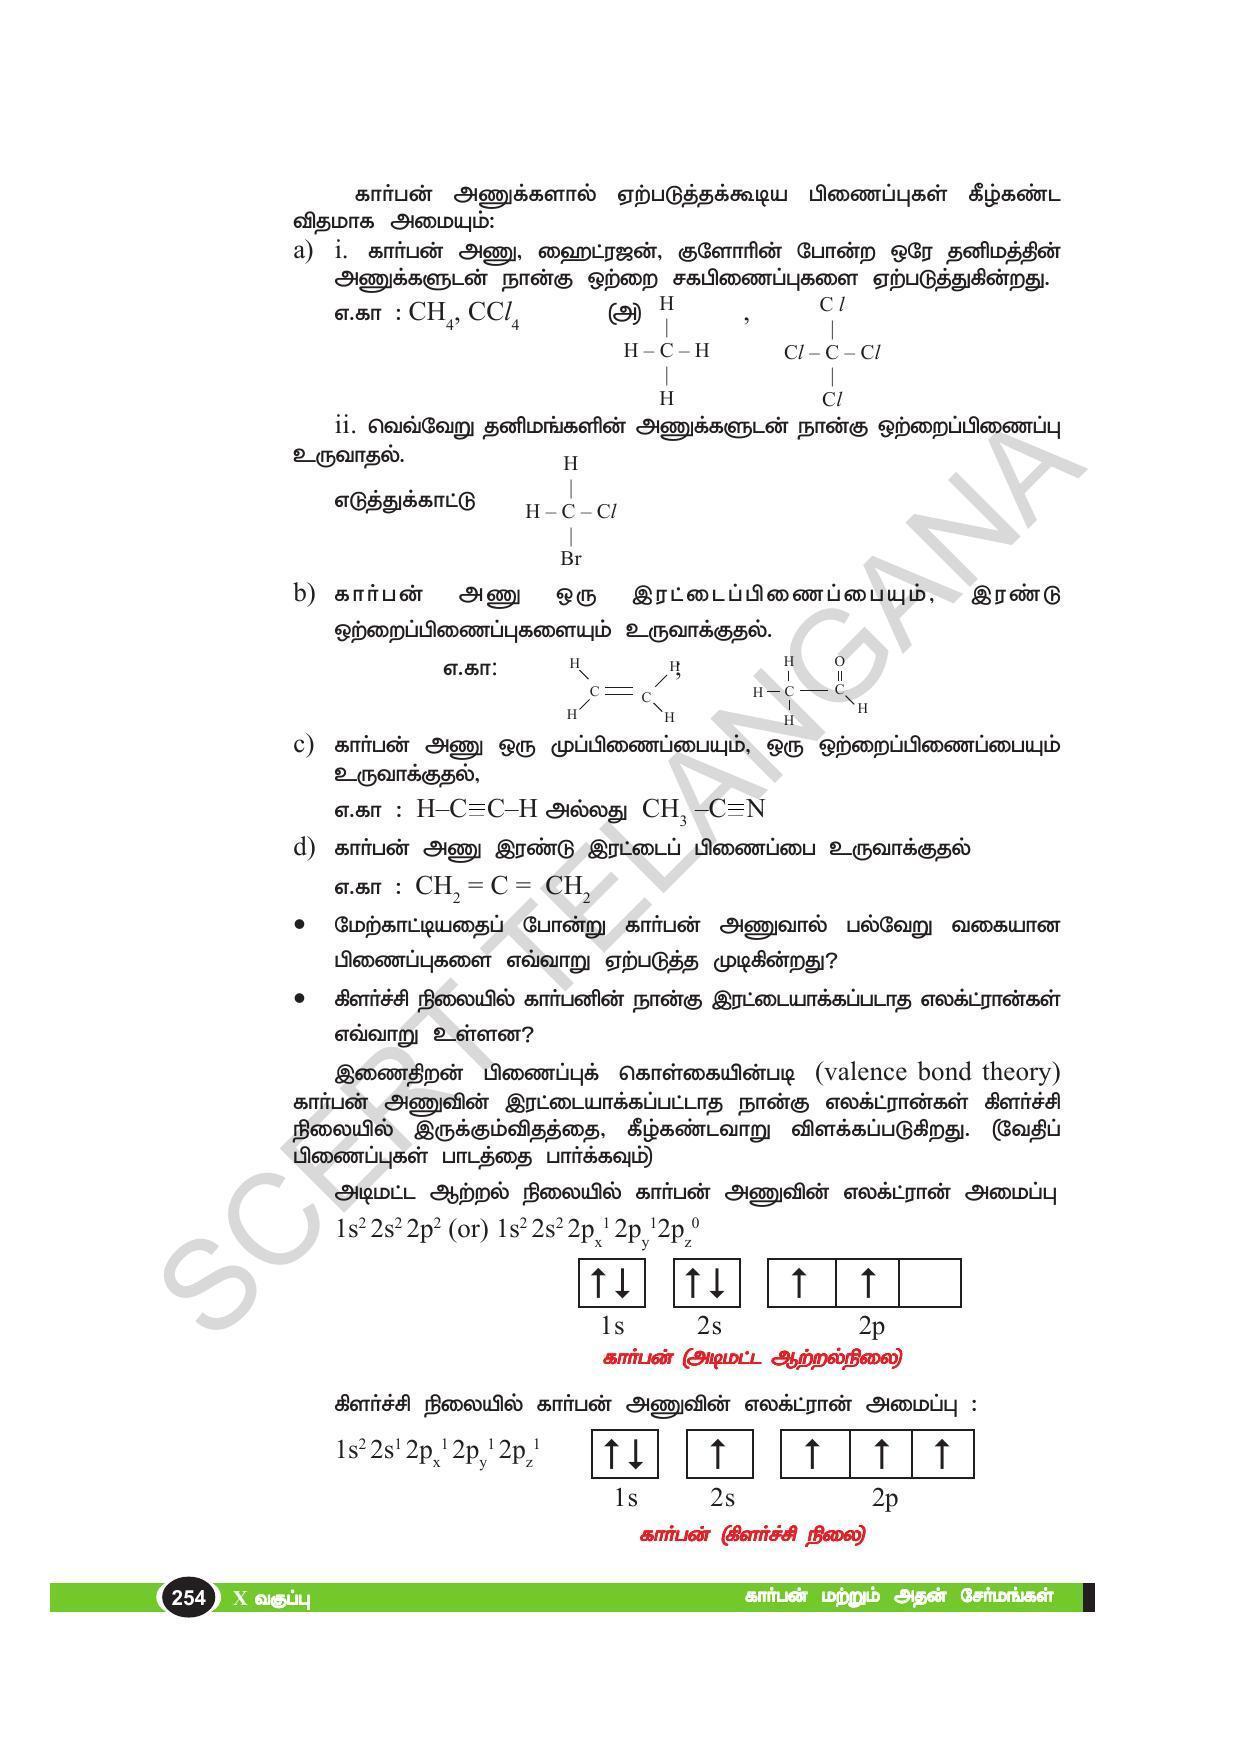 TS SCERT Class 10 Physical Science(Tamil Medium) Text Book - Page 266